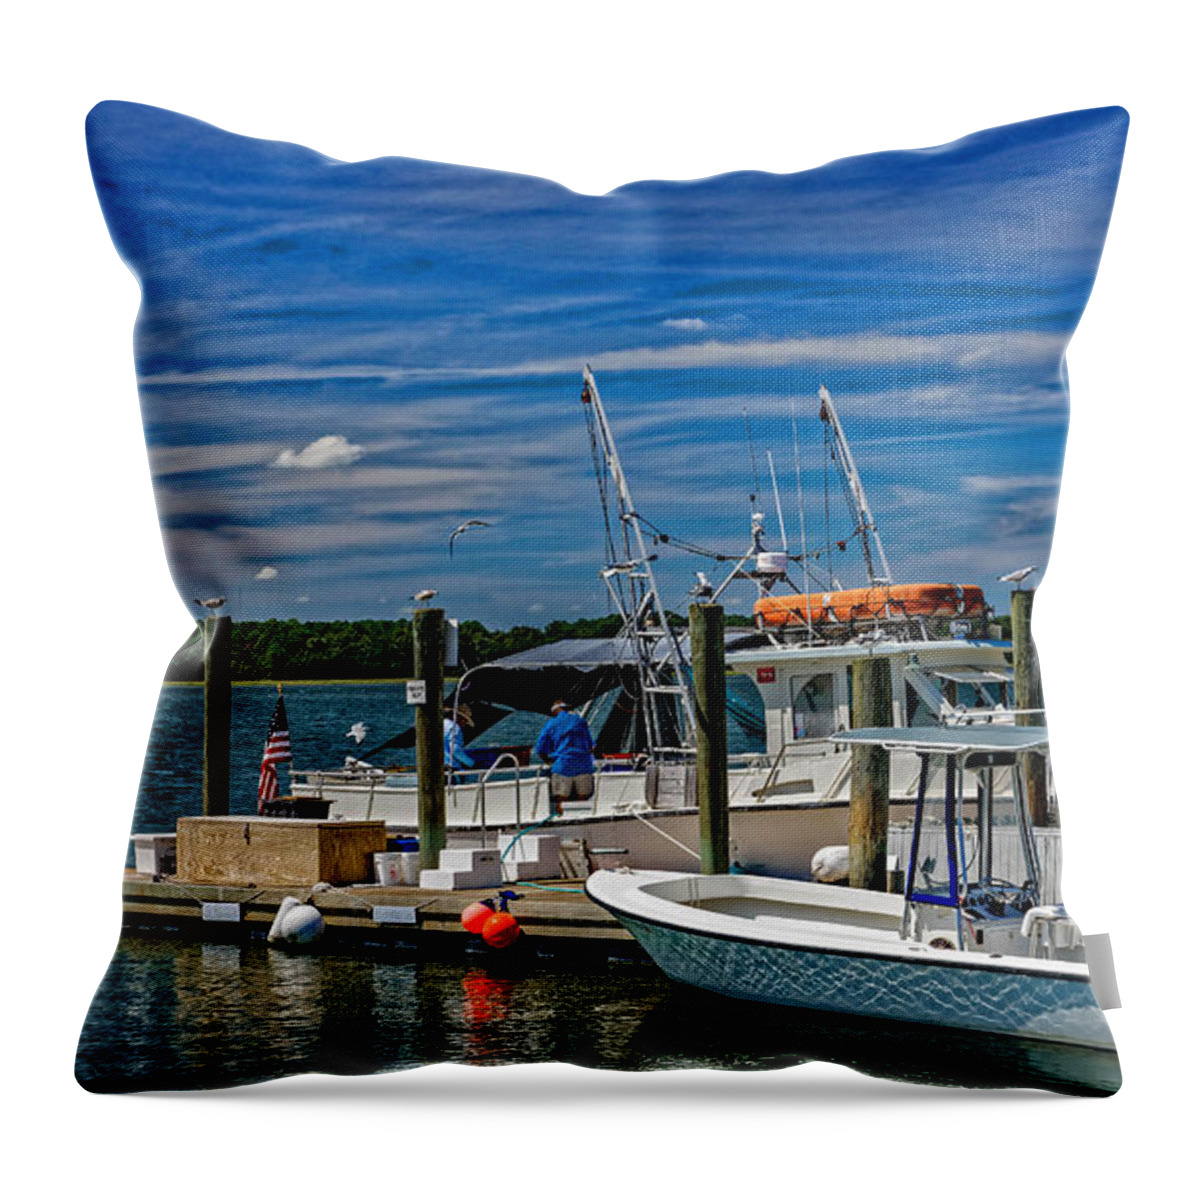 Boat Throw Pillow featuring the photograph Sorting The Catch by Paul Mashburn